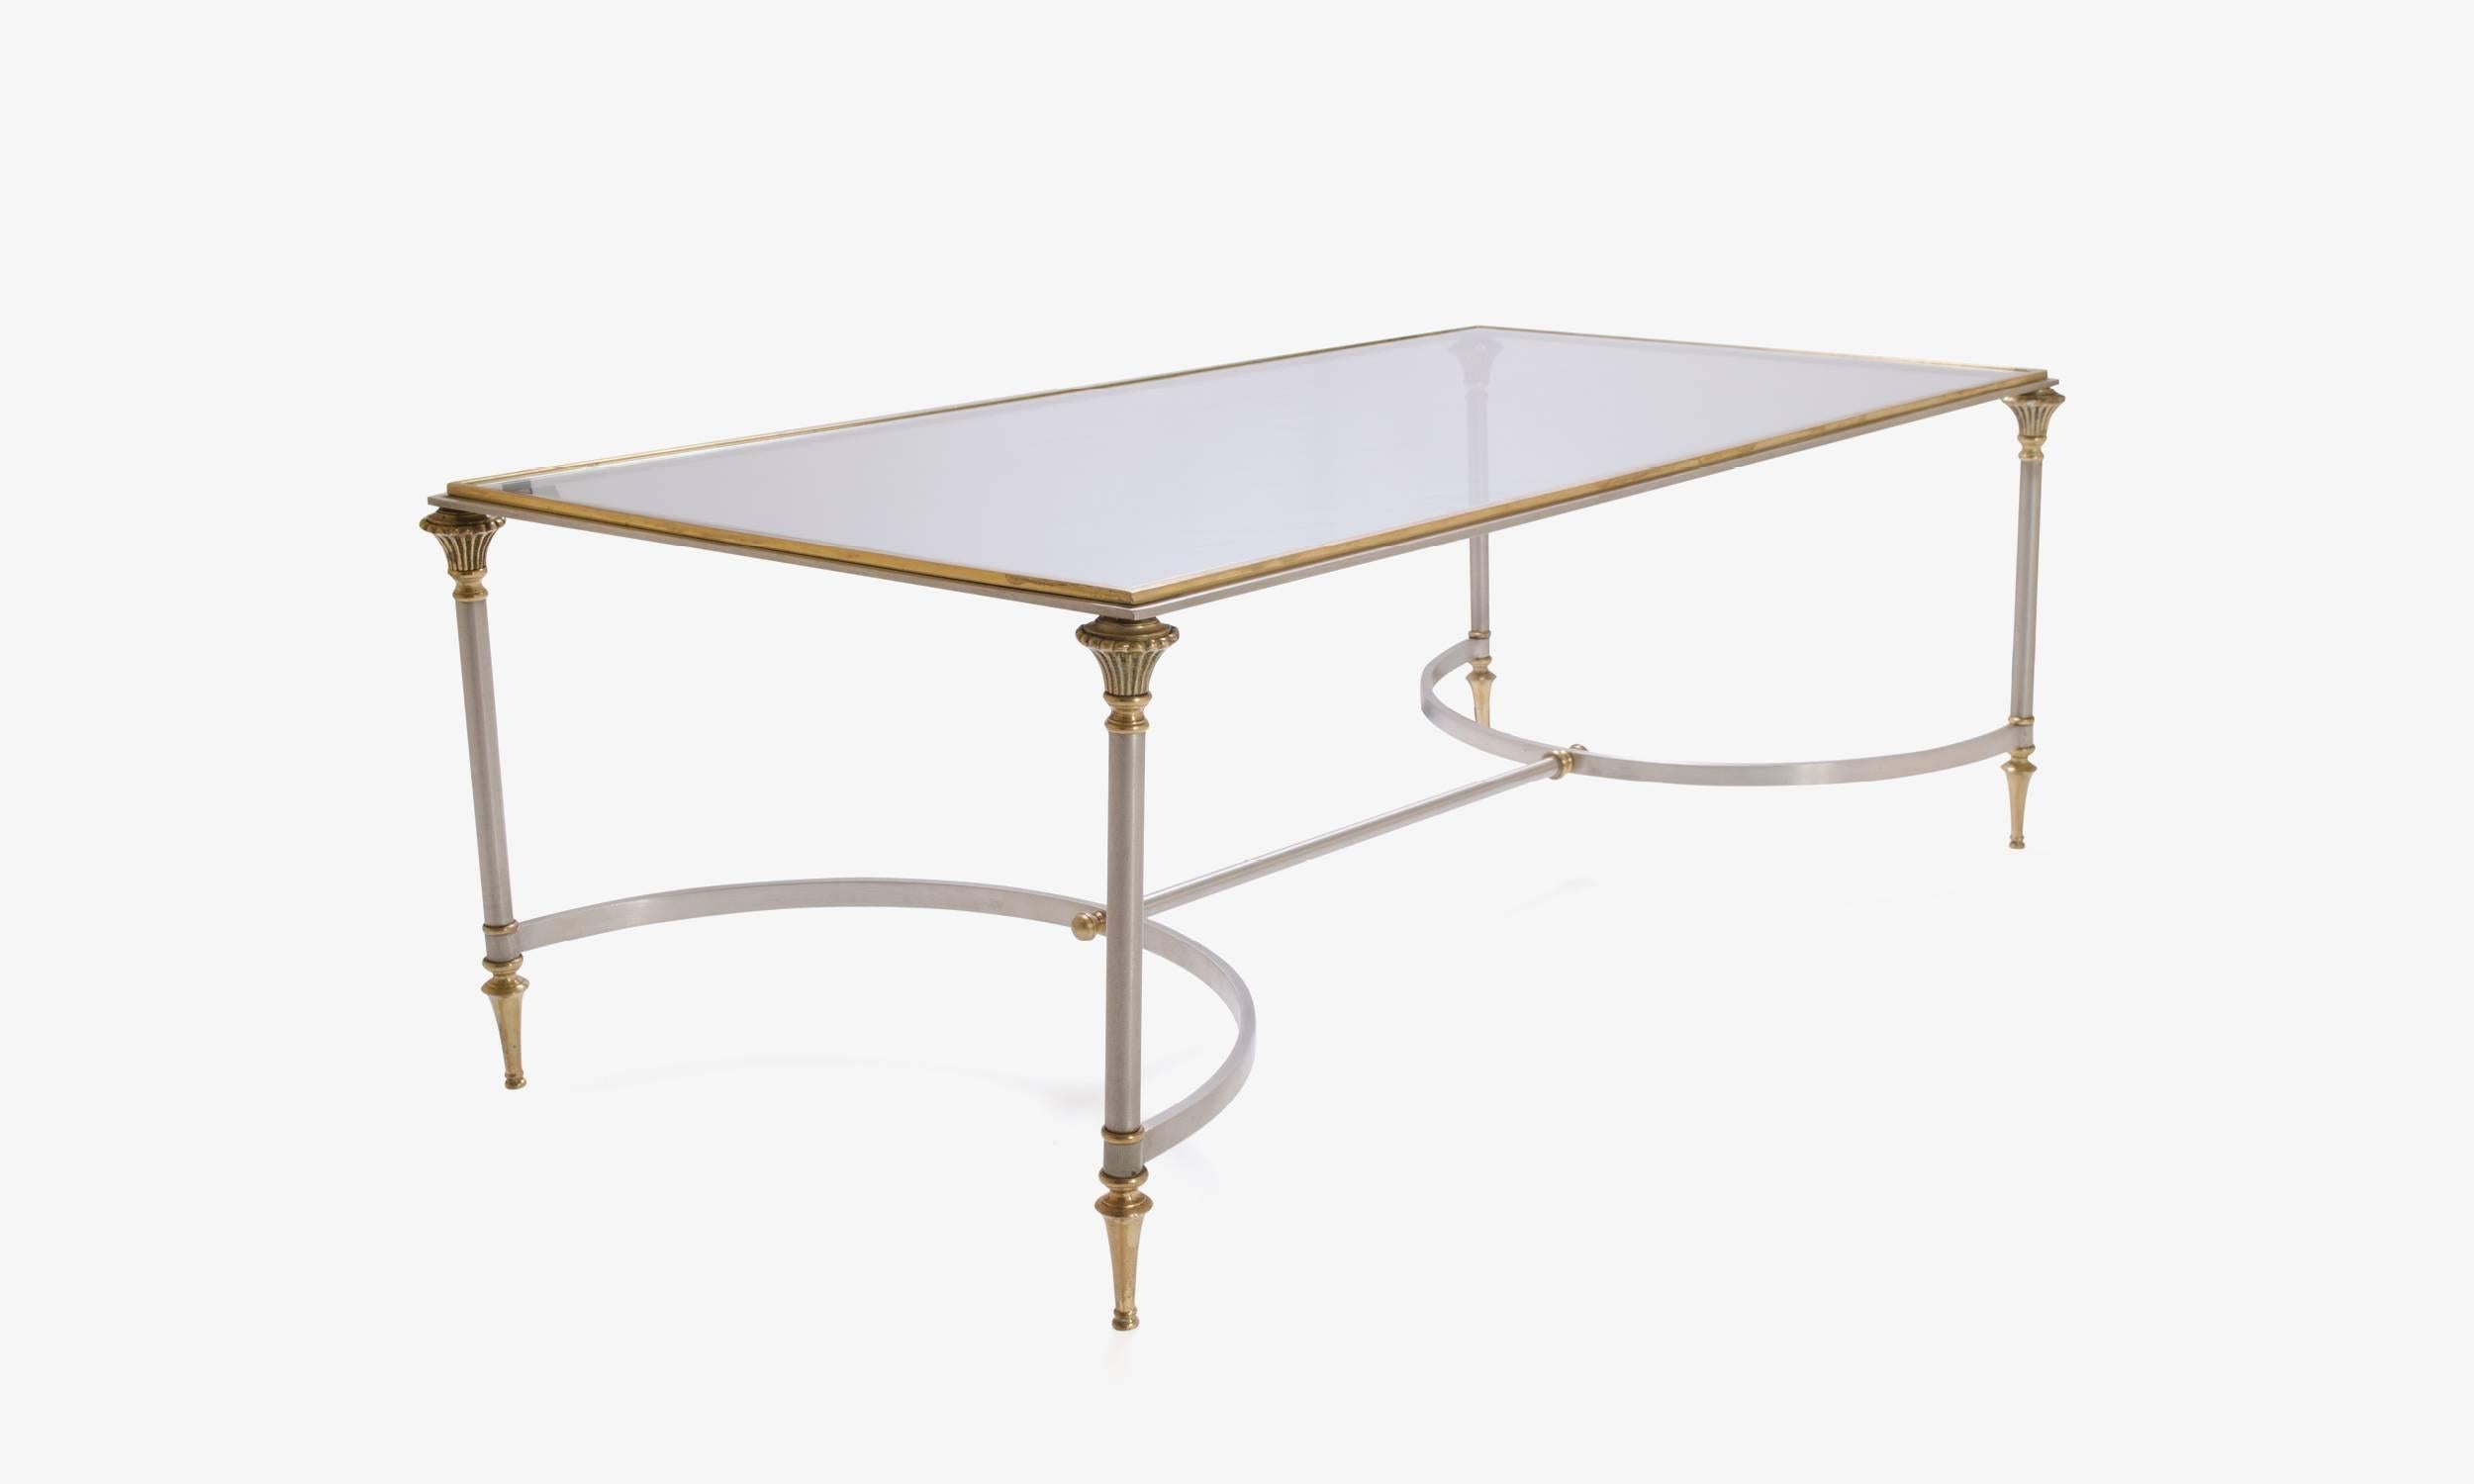 An elegant design with superior construction. Brass and steel contrast playfully with one another throughout this wonderful cocktail table in the manner of Maison Jansen. From finials to fleurs every accent of this table does not go unnoticed. The